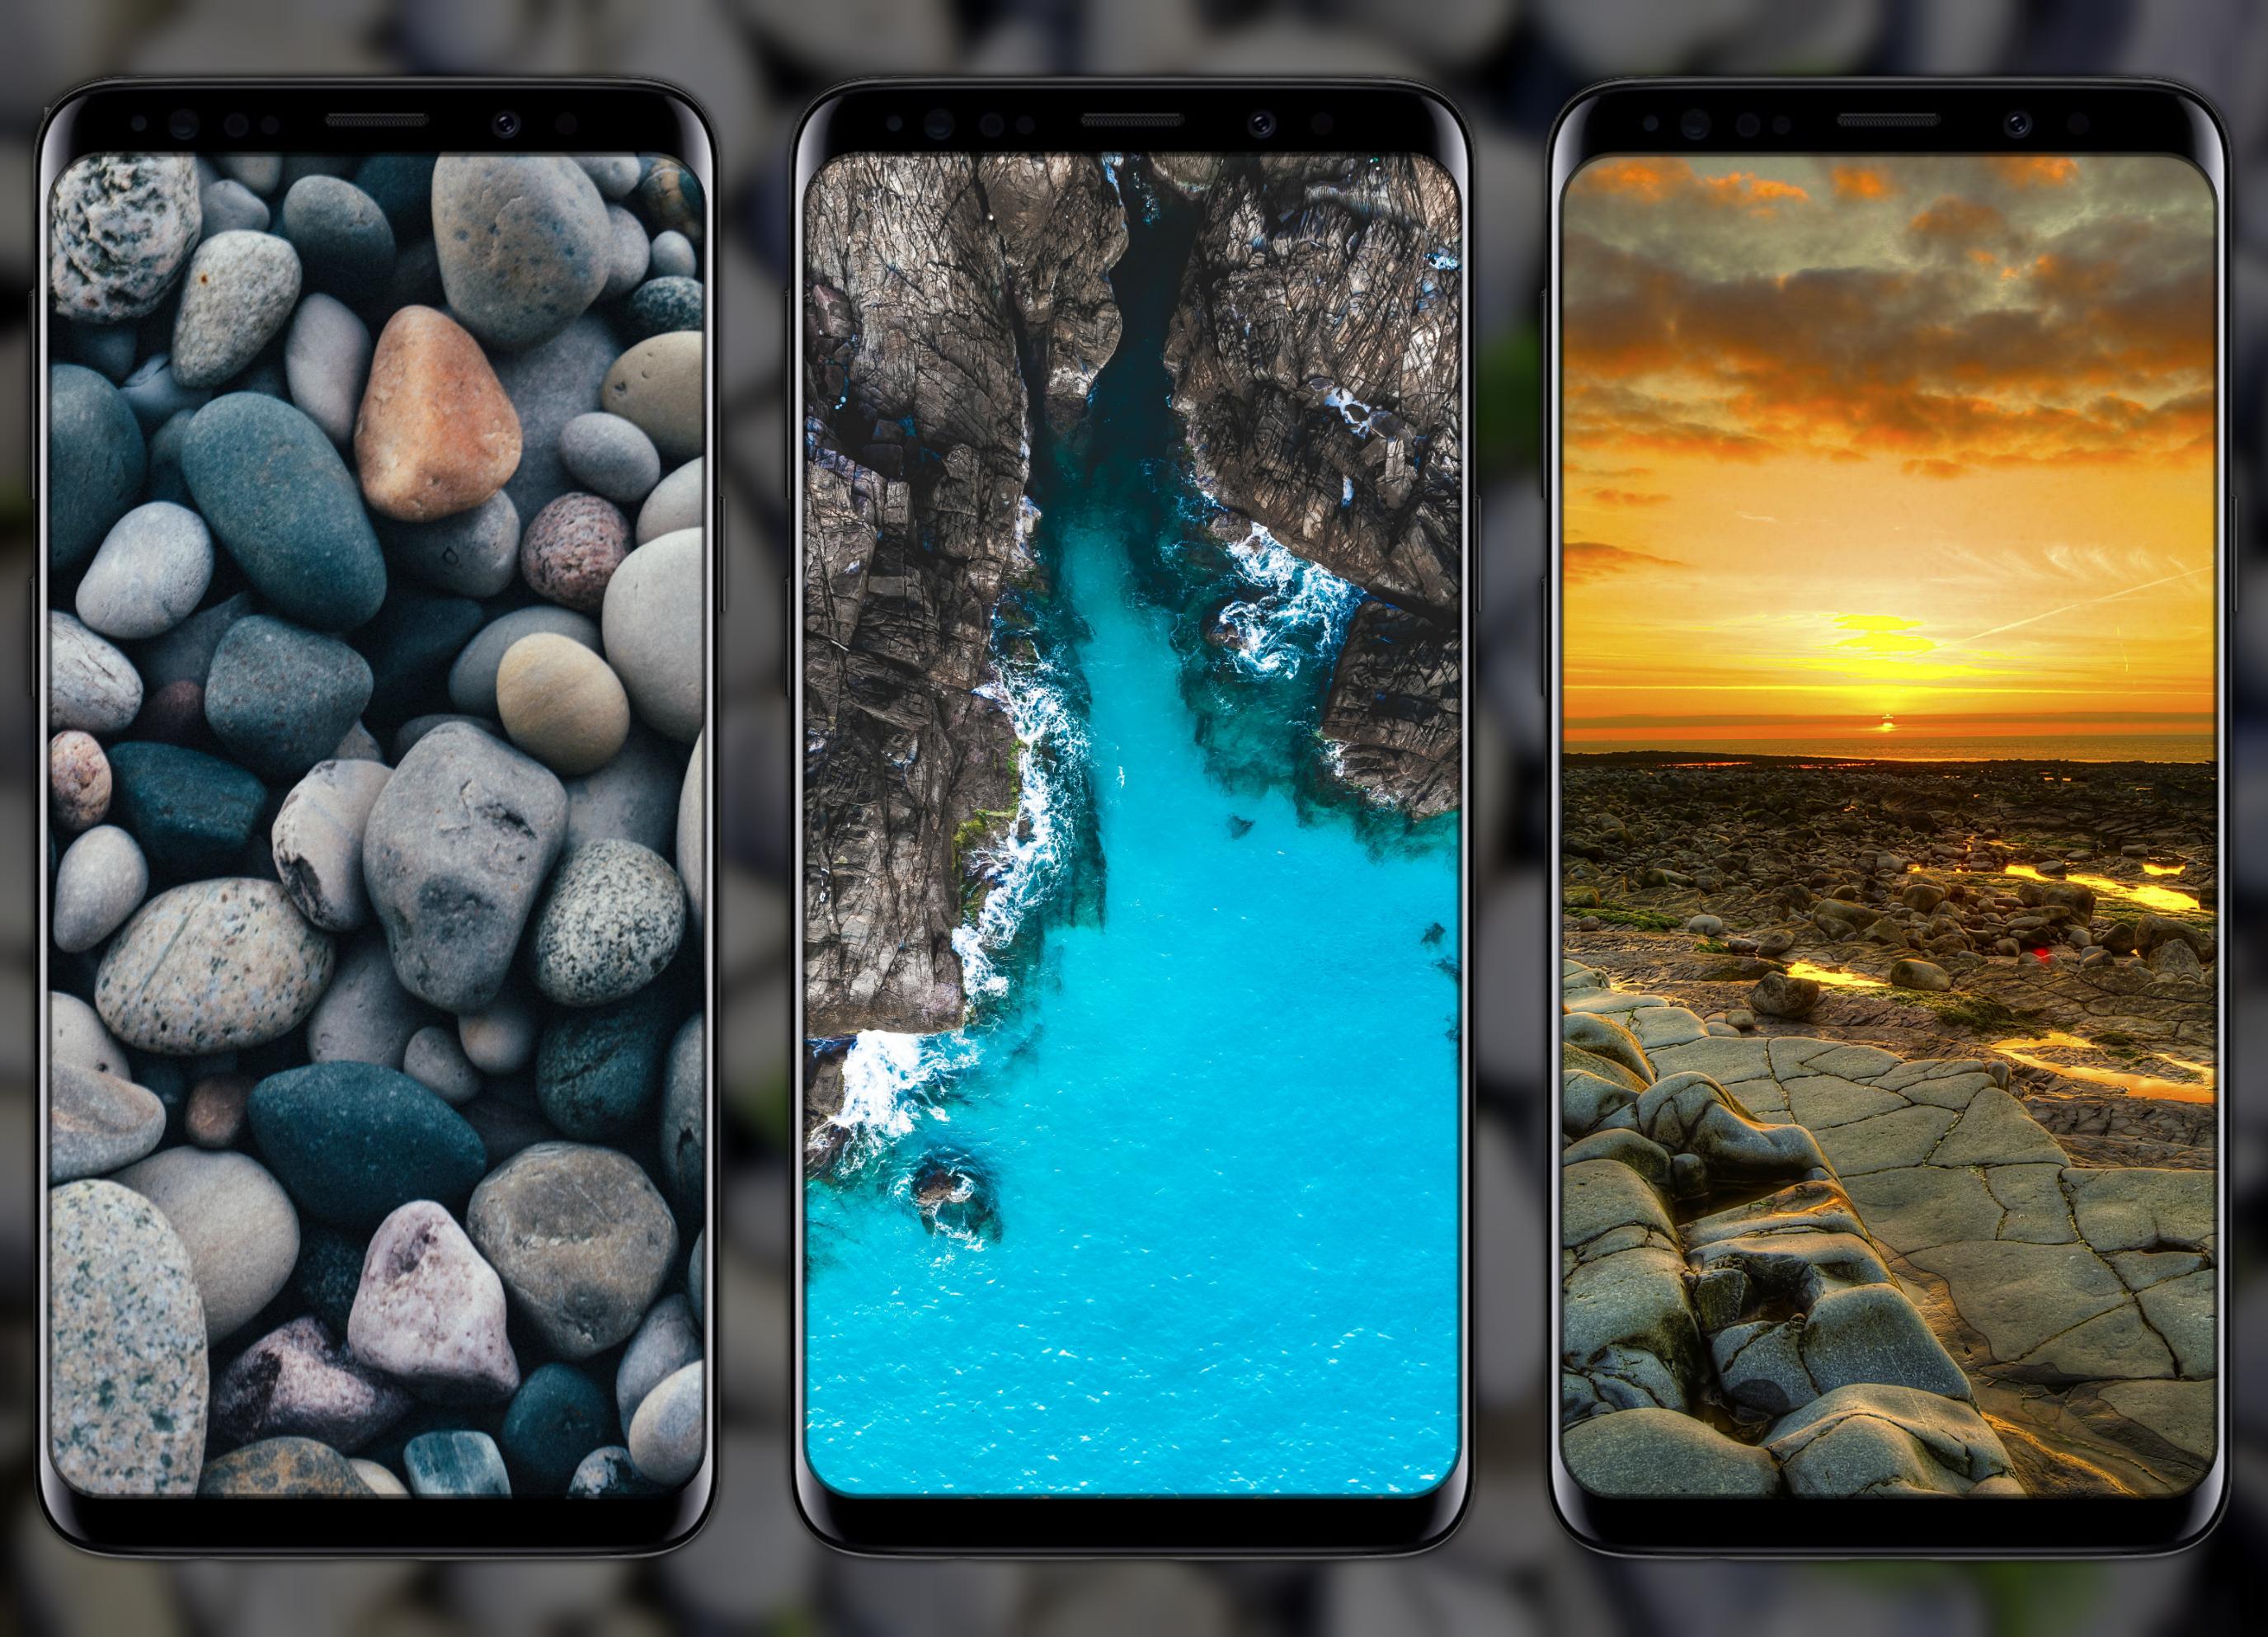 25000 Hd Wallpapers Full Ultra Hd Backgrounds For Android Apk Download